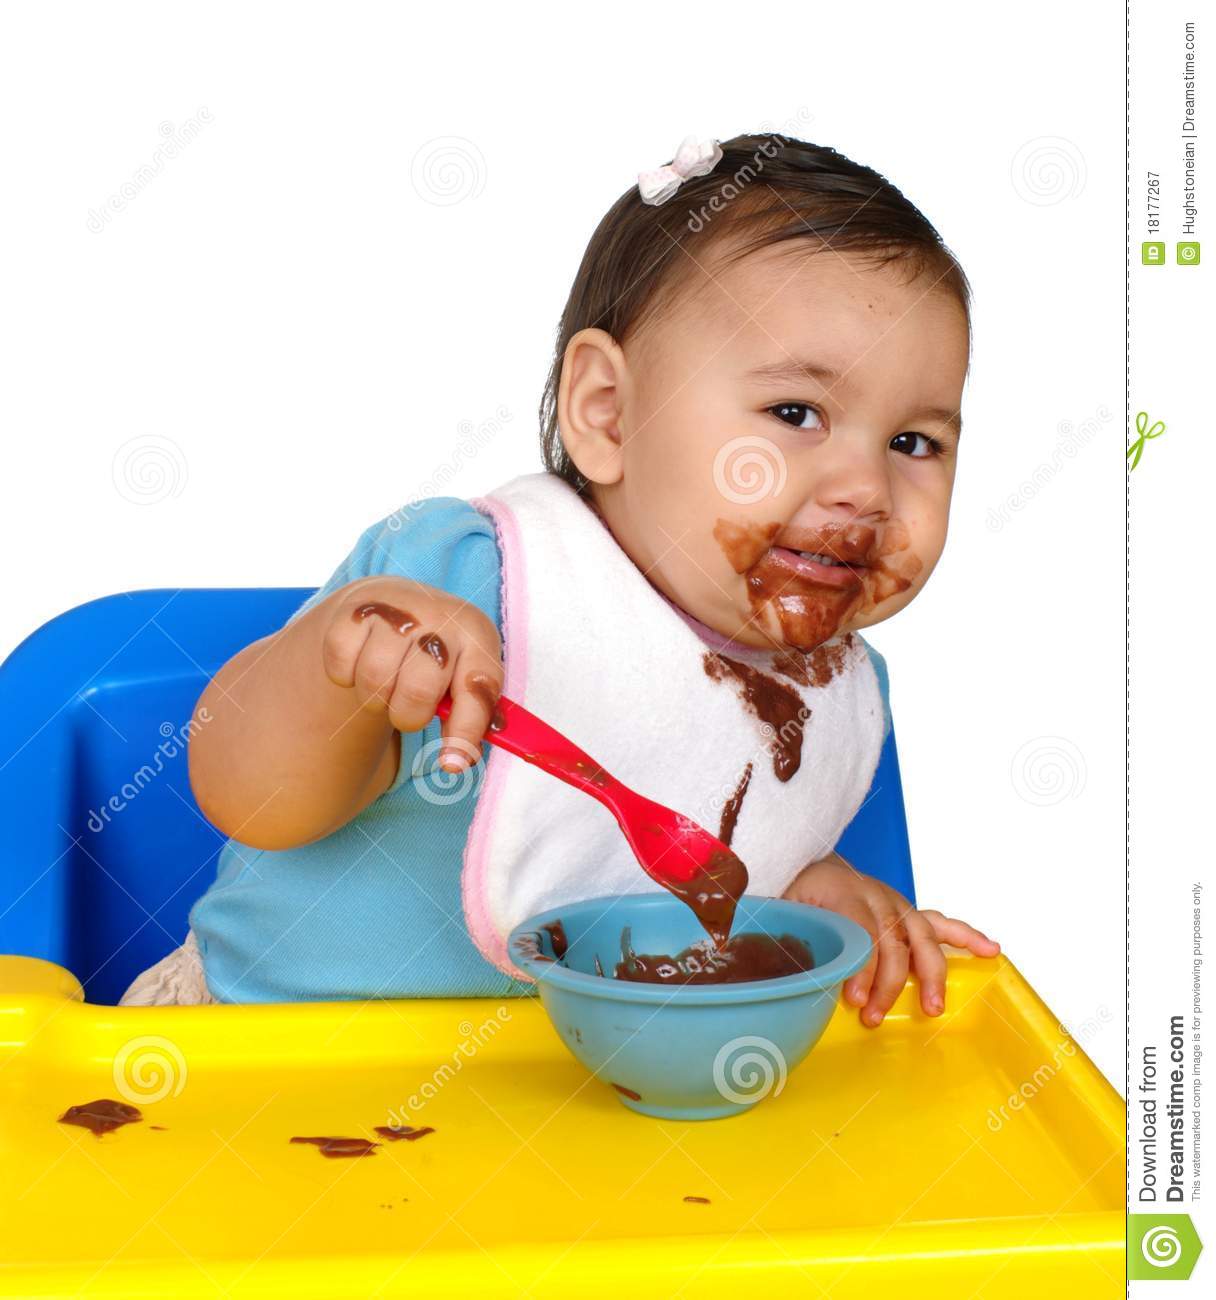     Chocolate Pudding Making A Mess Isolated On Pure White Background